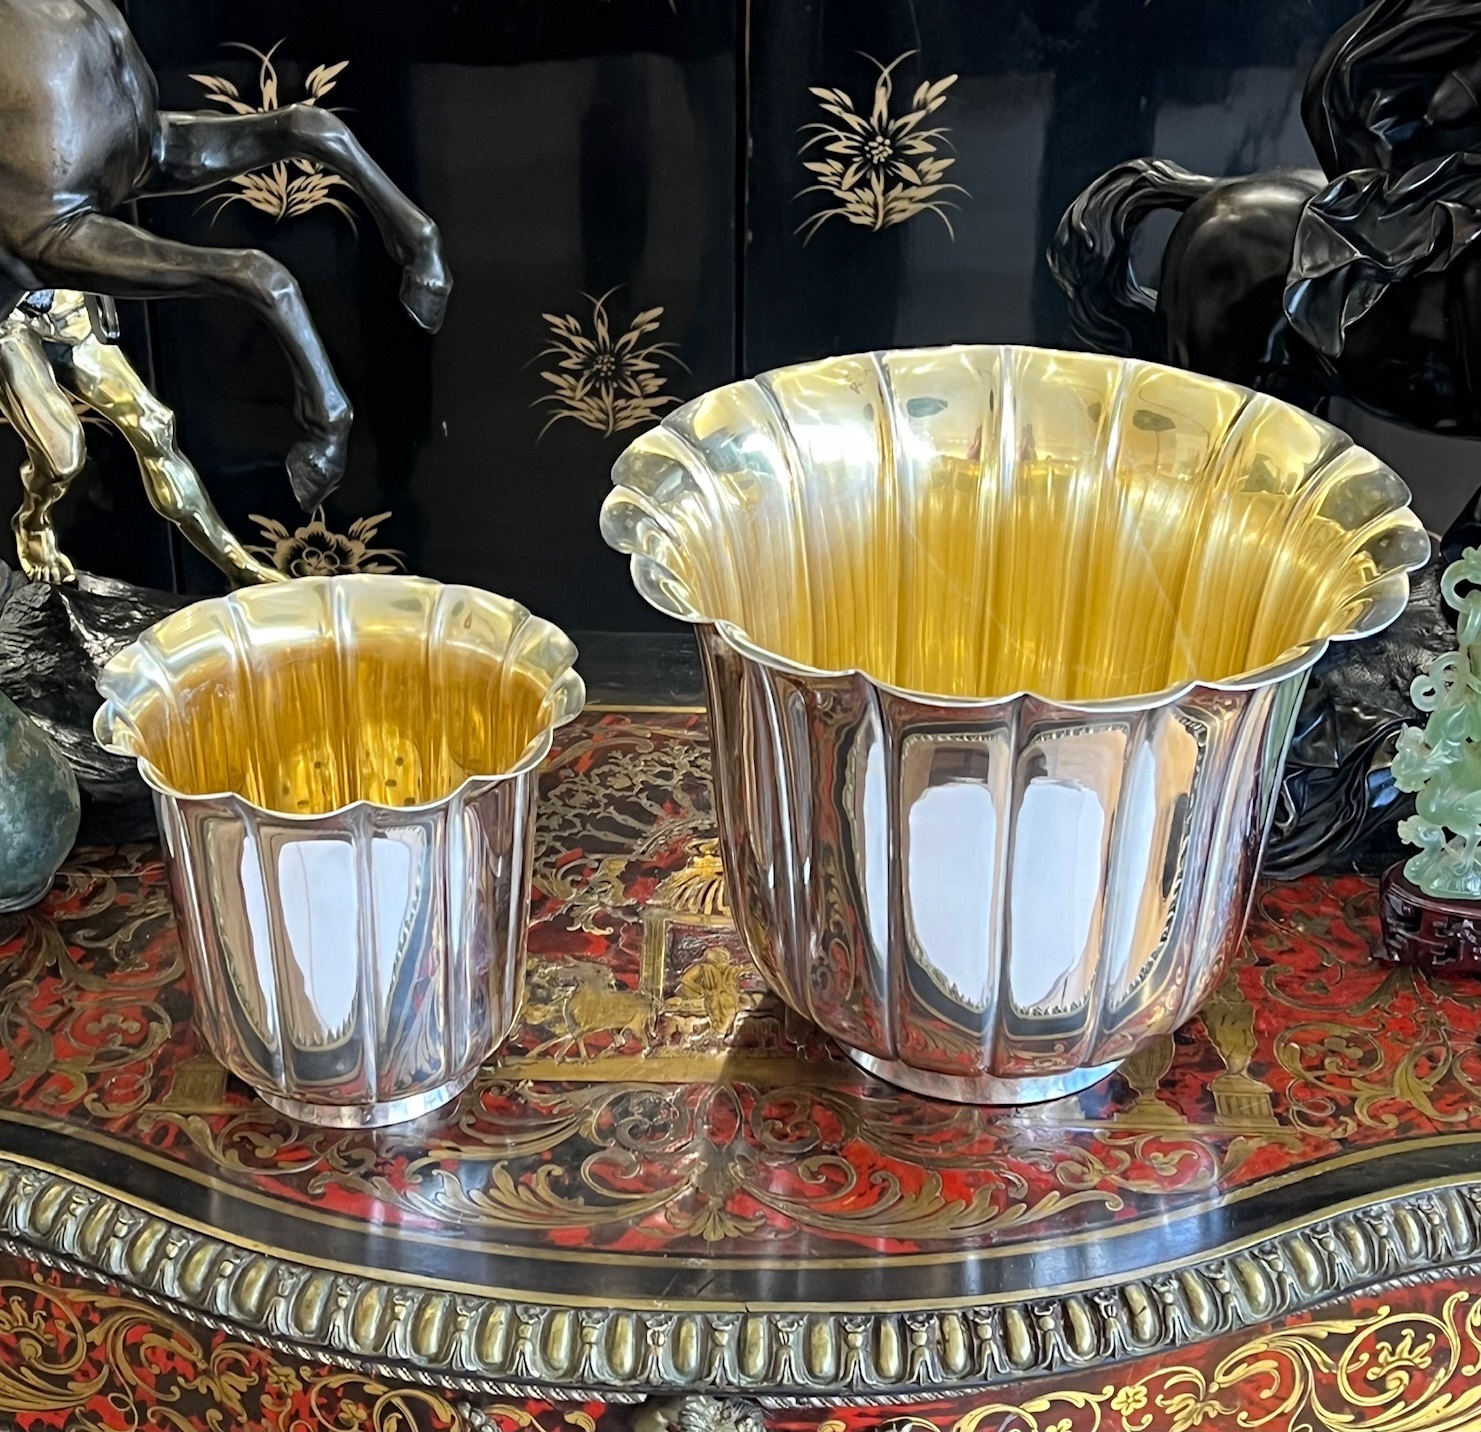 A SILVER AND SILVER GILT WINE COOLER AND ICE BUCKET BY IL LEONE, FIRENZE - Image 2 of 6